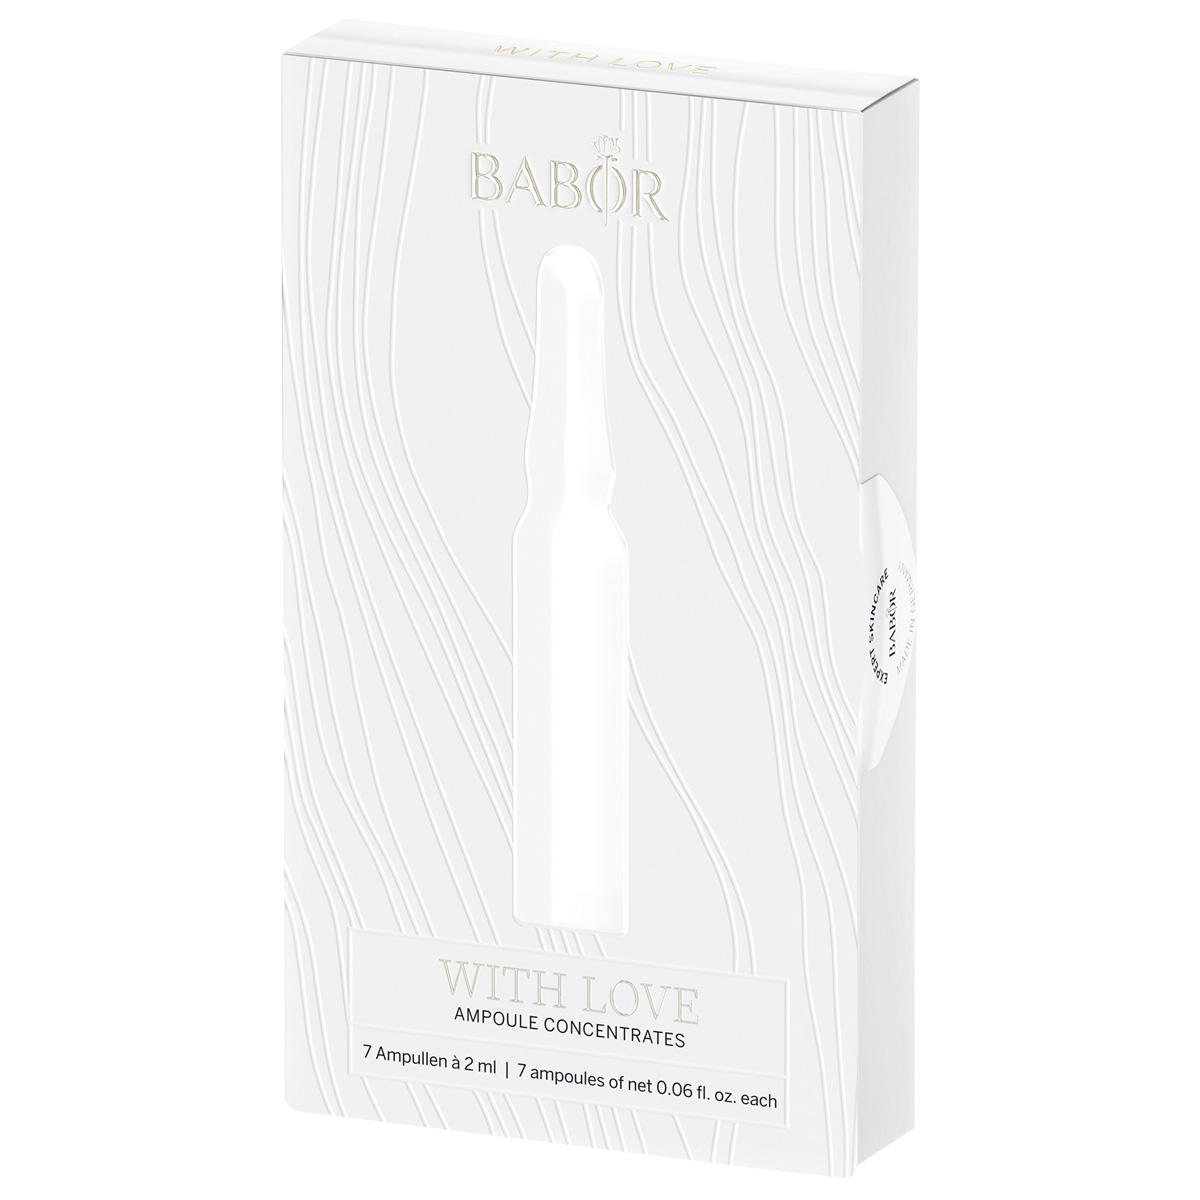 BABOR AMPOULE CONCENTRATES With Love Geschenkset 14 ml - 3